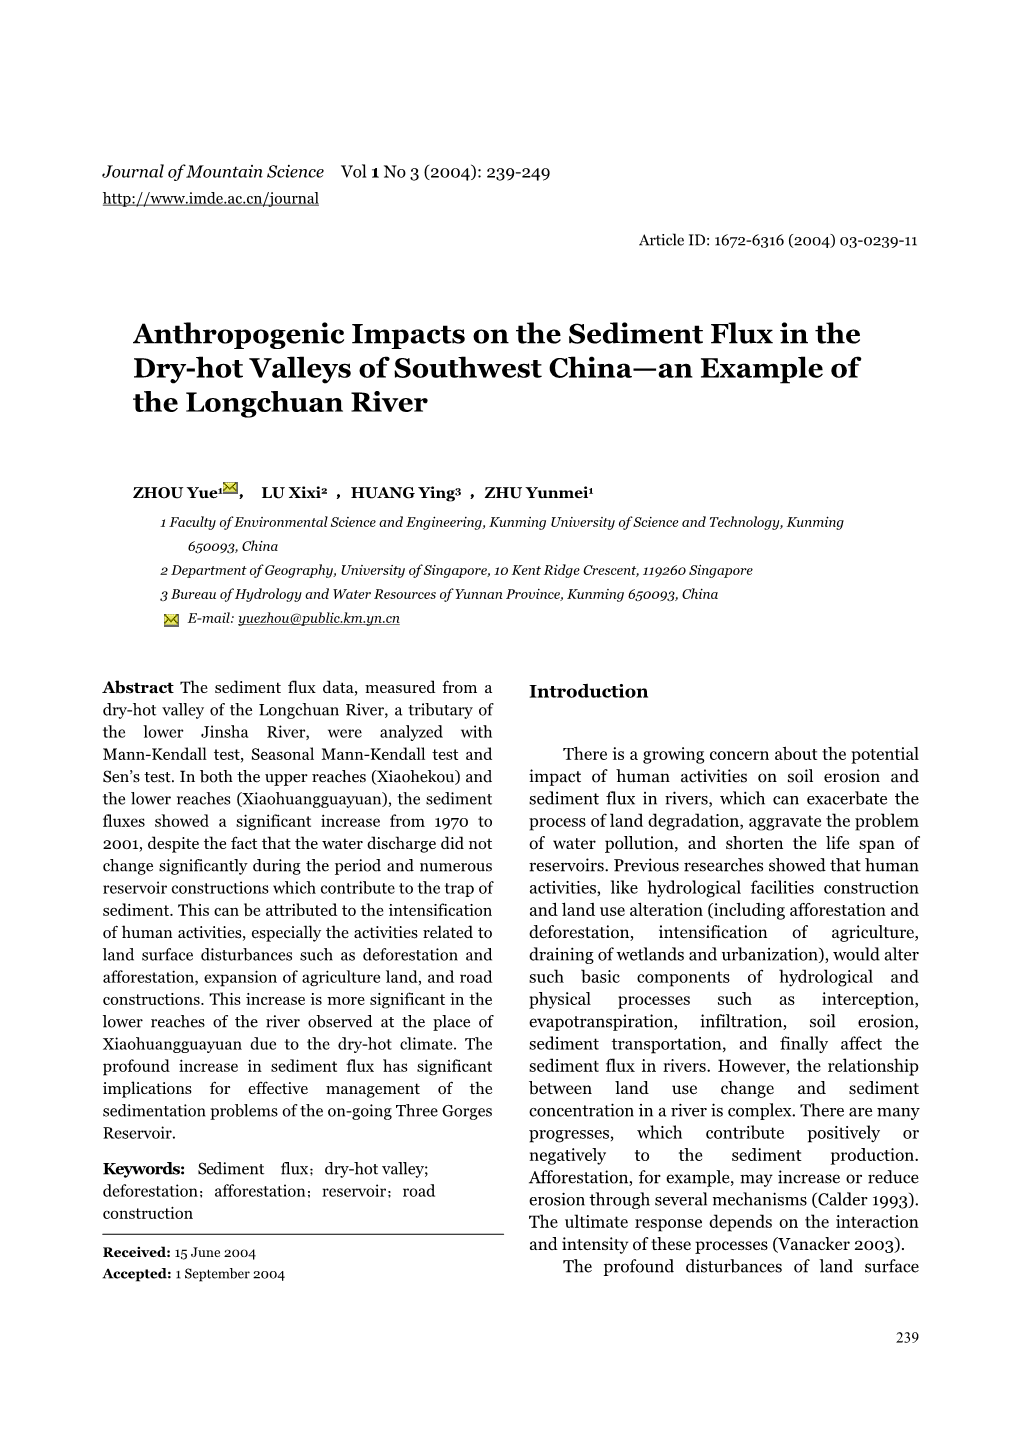 Anthropogenic Impacts on the Sediment Flux in the Dry-Hot Valleys of Southwest China—An Example of the Longchuan River